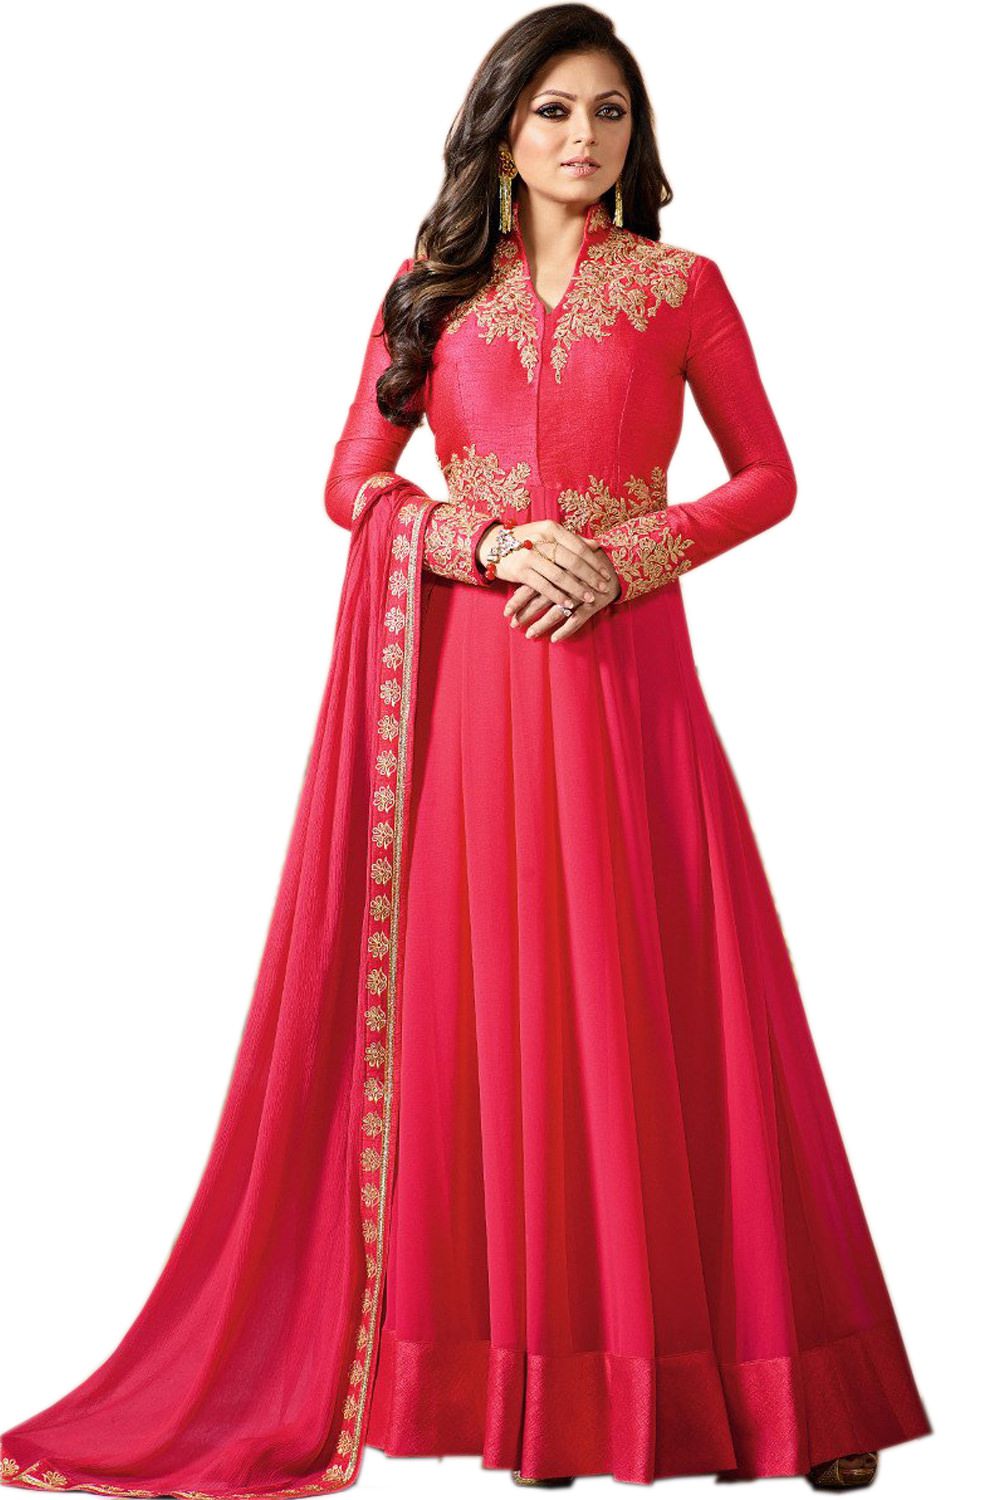 AP ENTERPRISE Red,Pink Georgette Anarkali Gown Semi-Stitched Suit - Buy ...